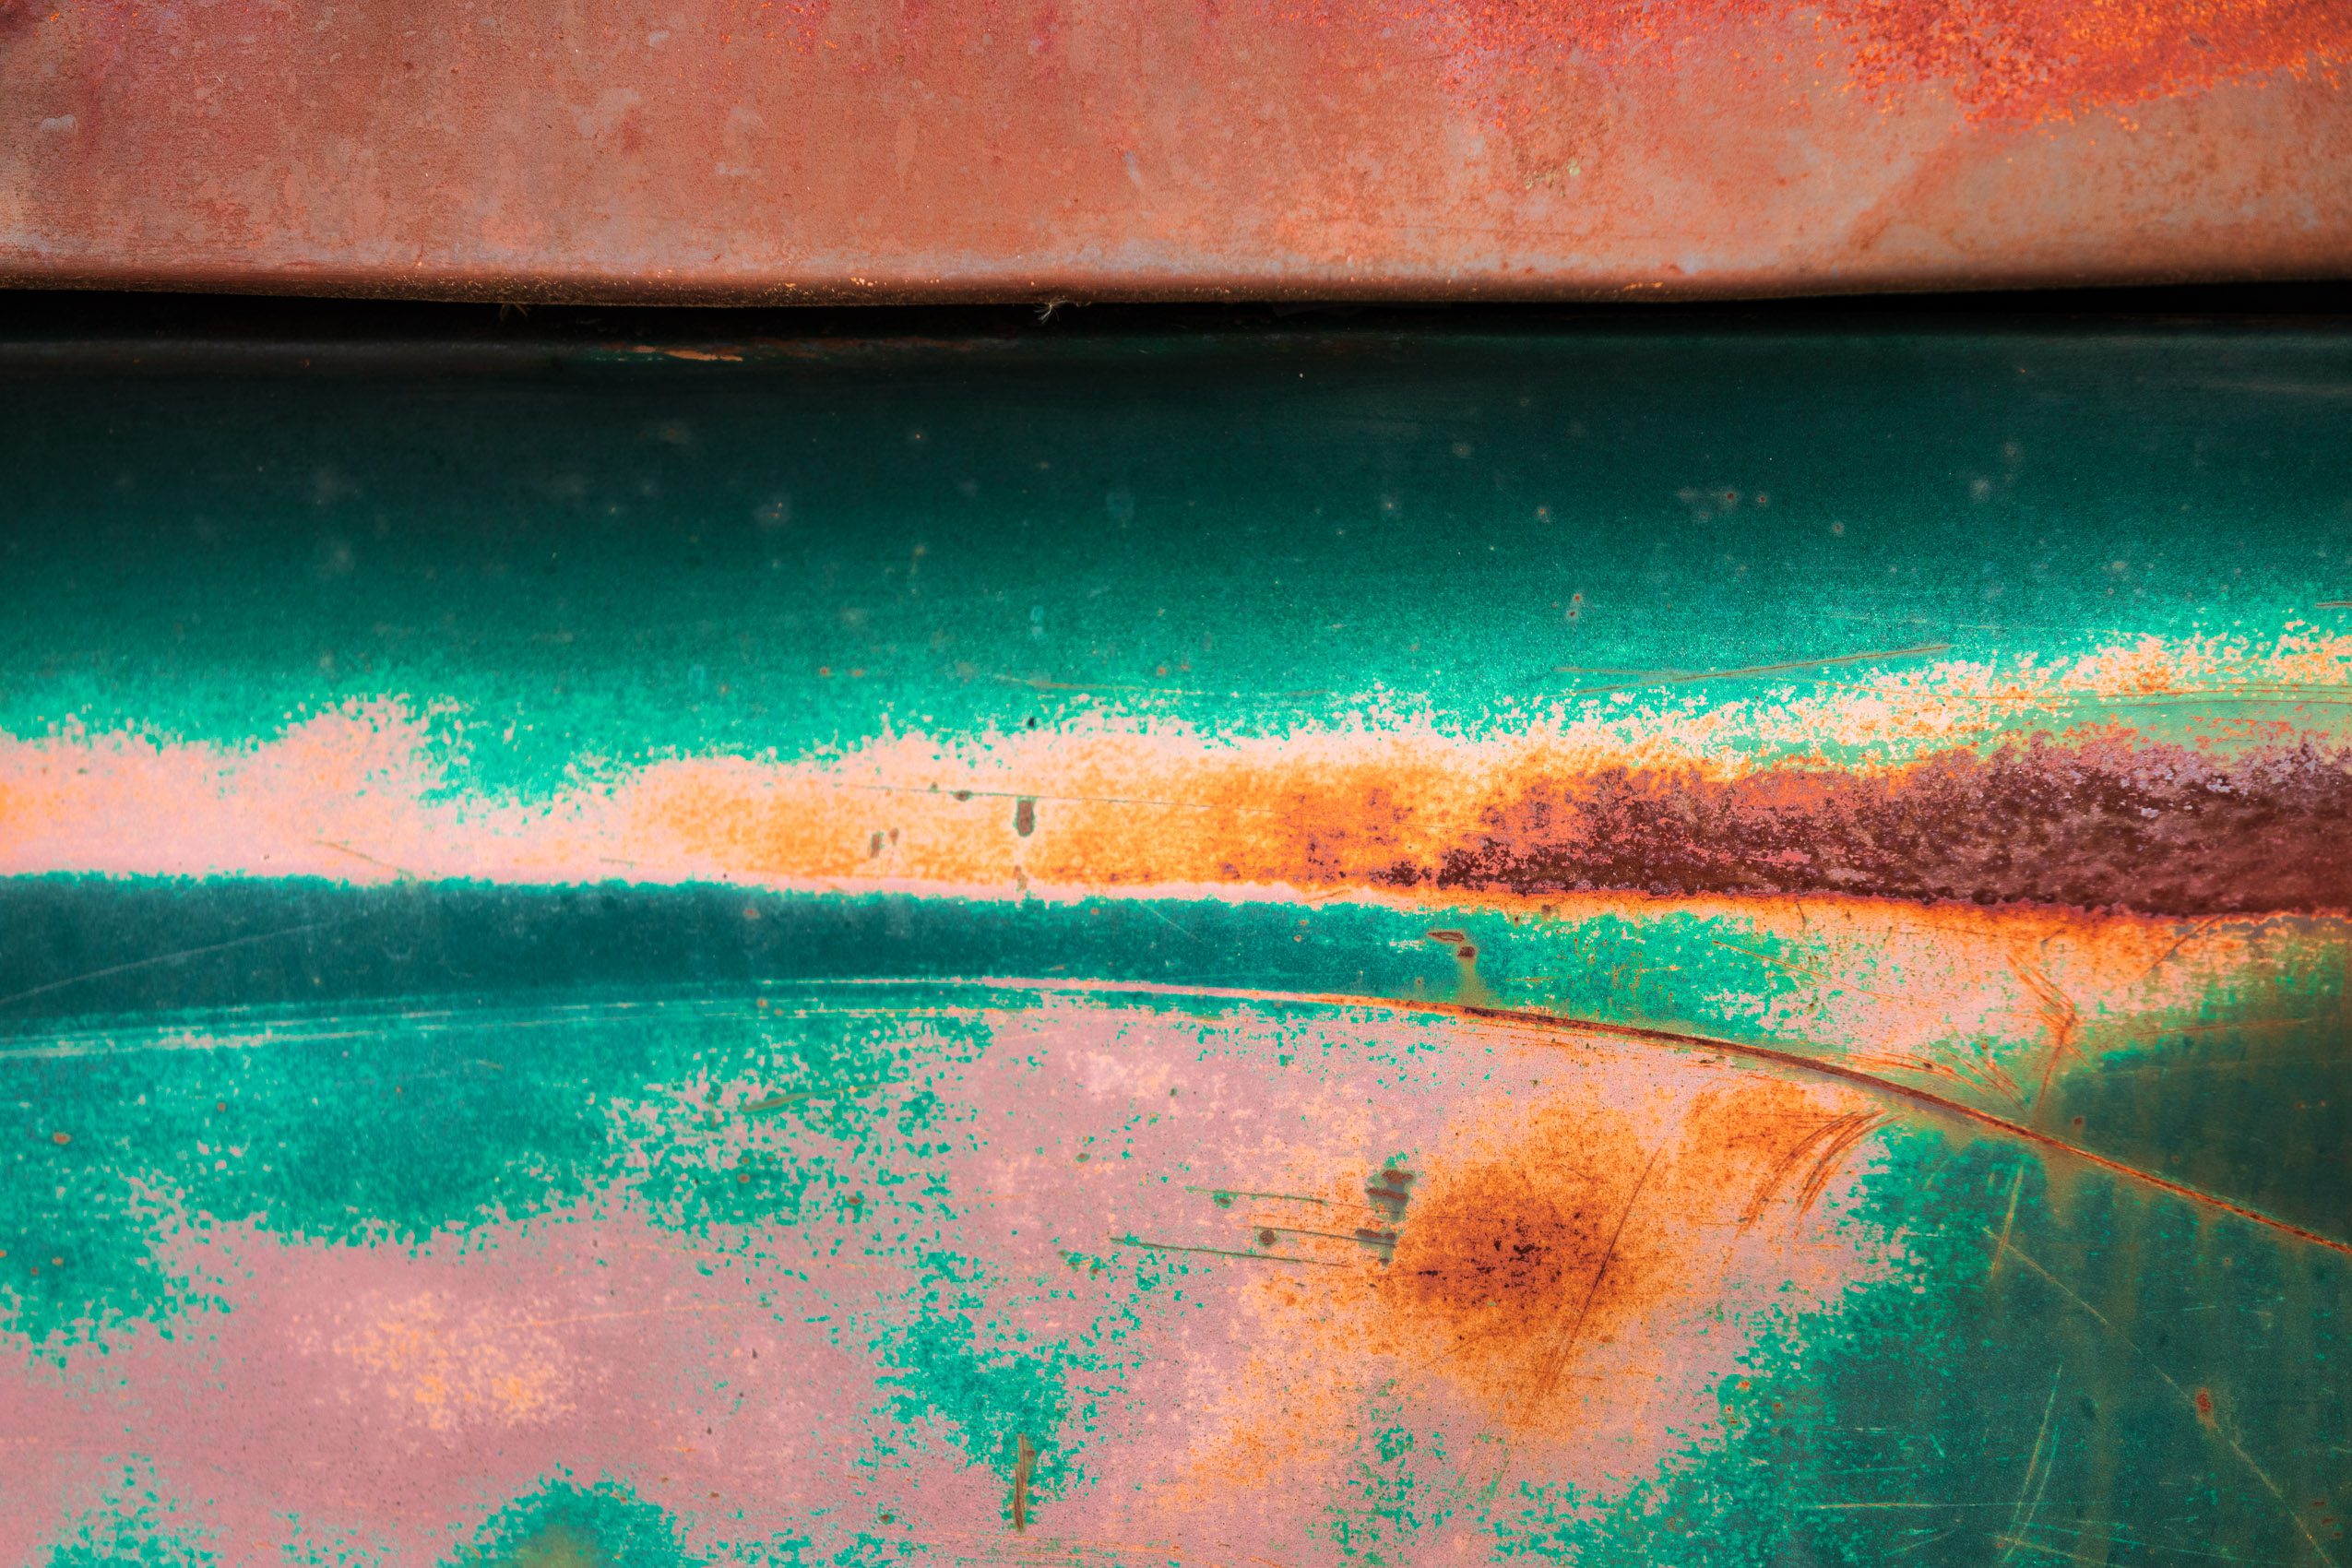 Corroded painted surface of a truck in Spruce Pine, North Carolina, USA. NC017